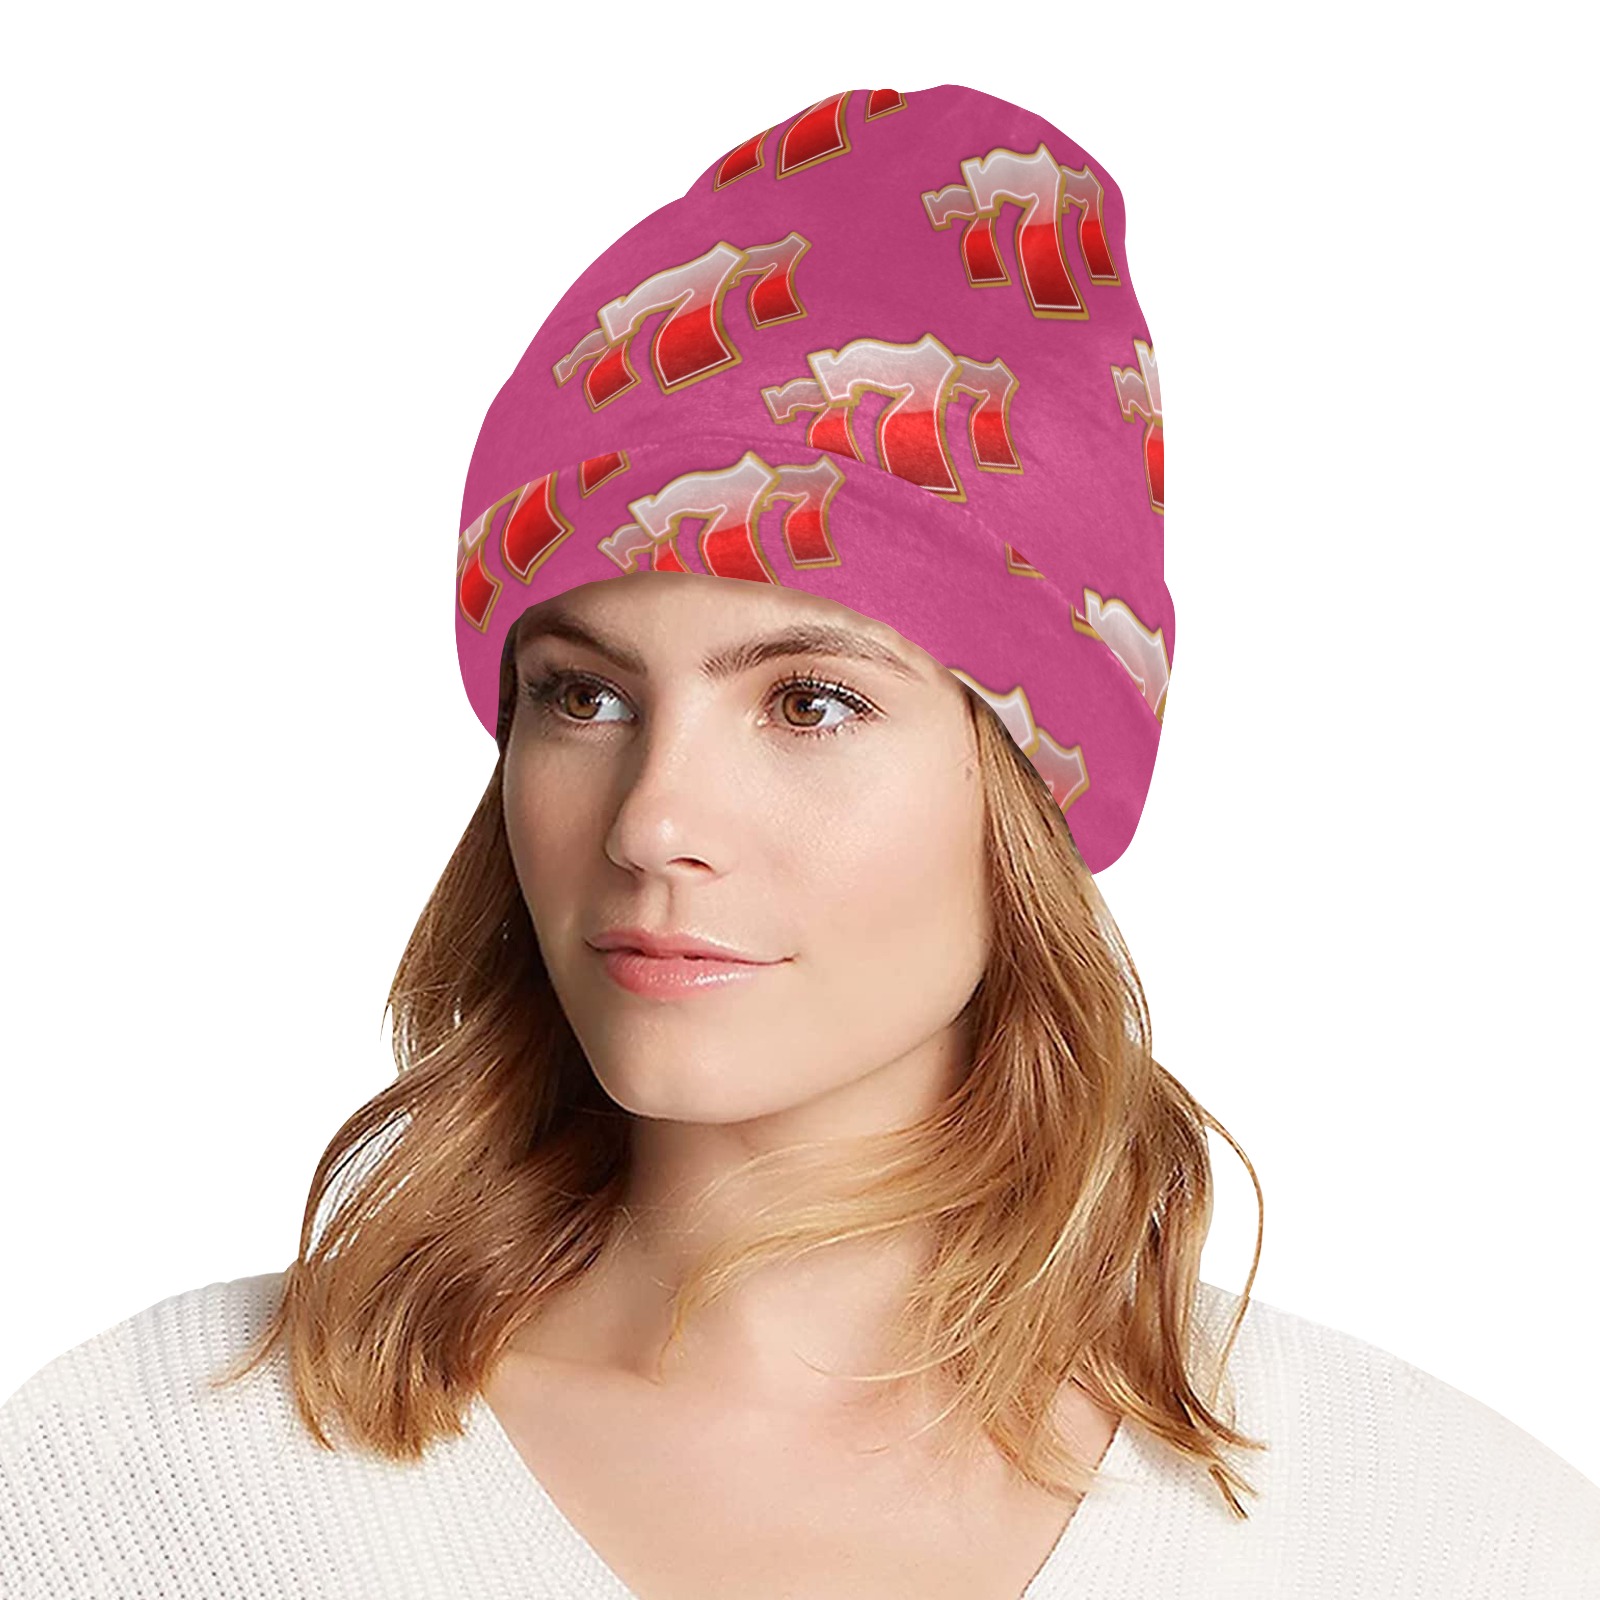 Las Vegas Lucky Sevens 777 - Pink All Over Print Beanie for Adults